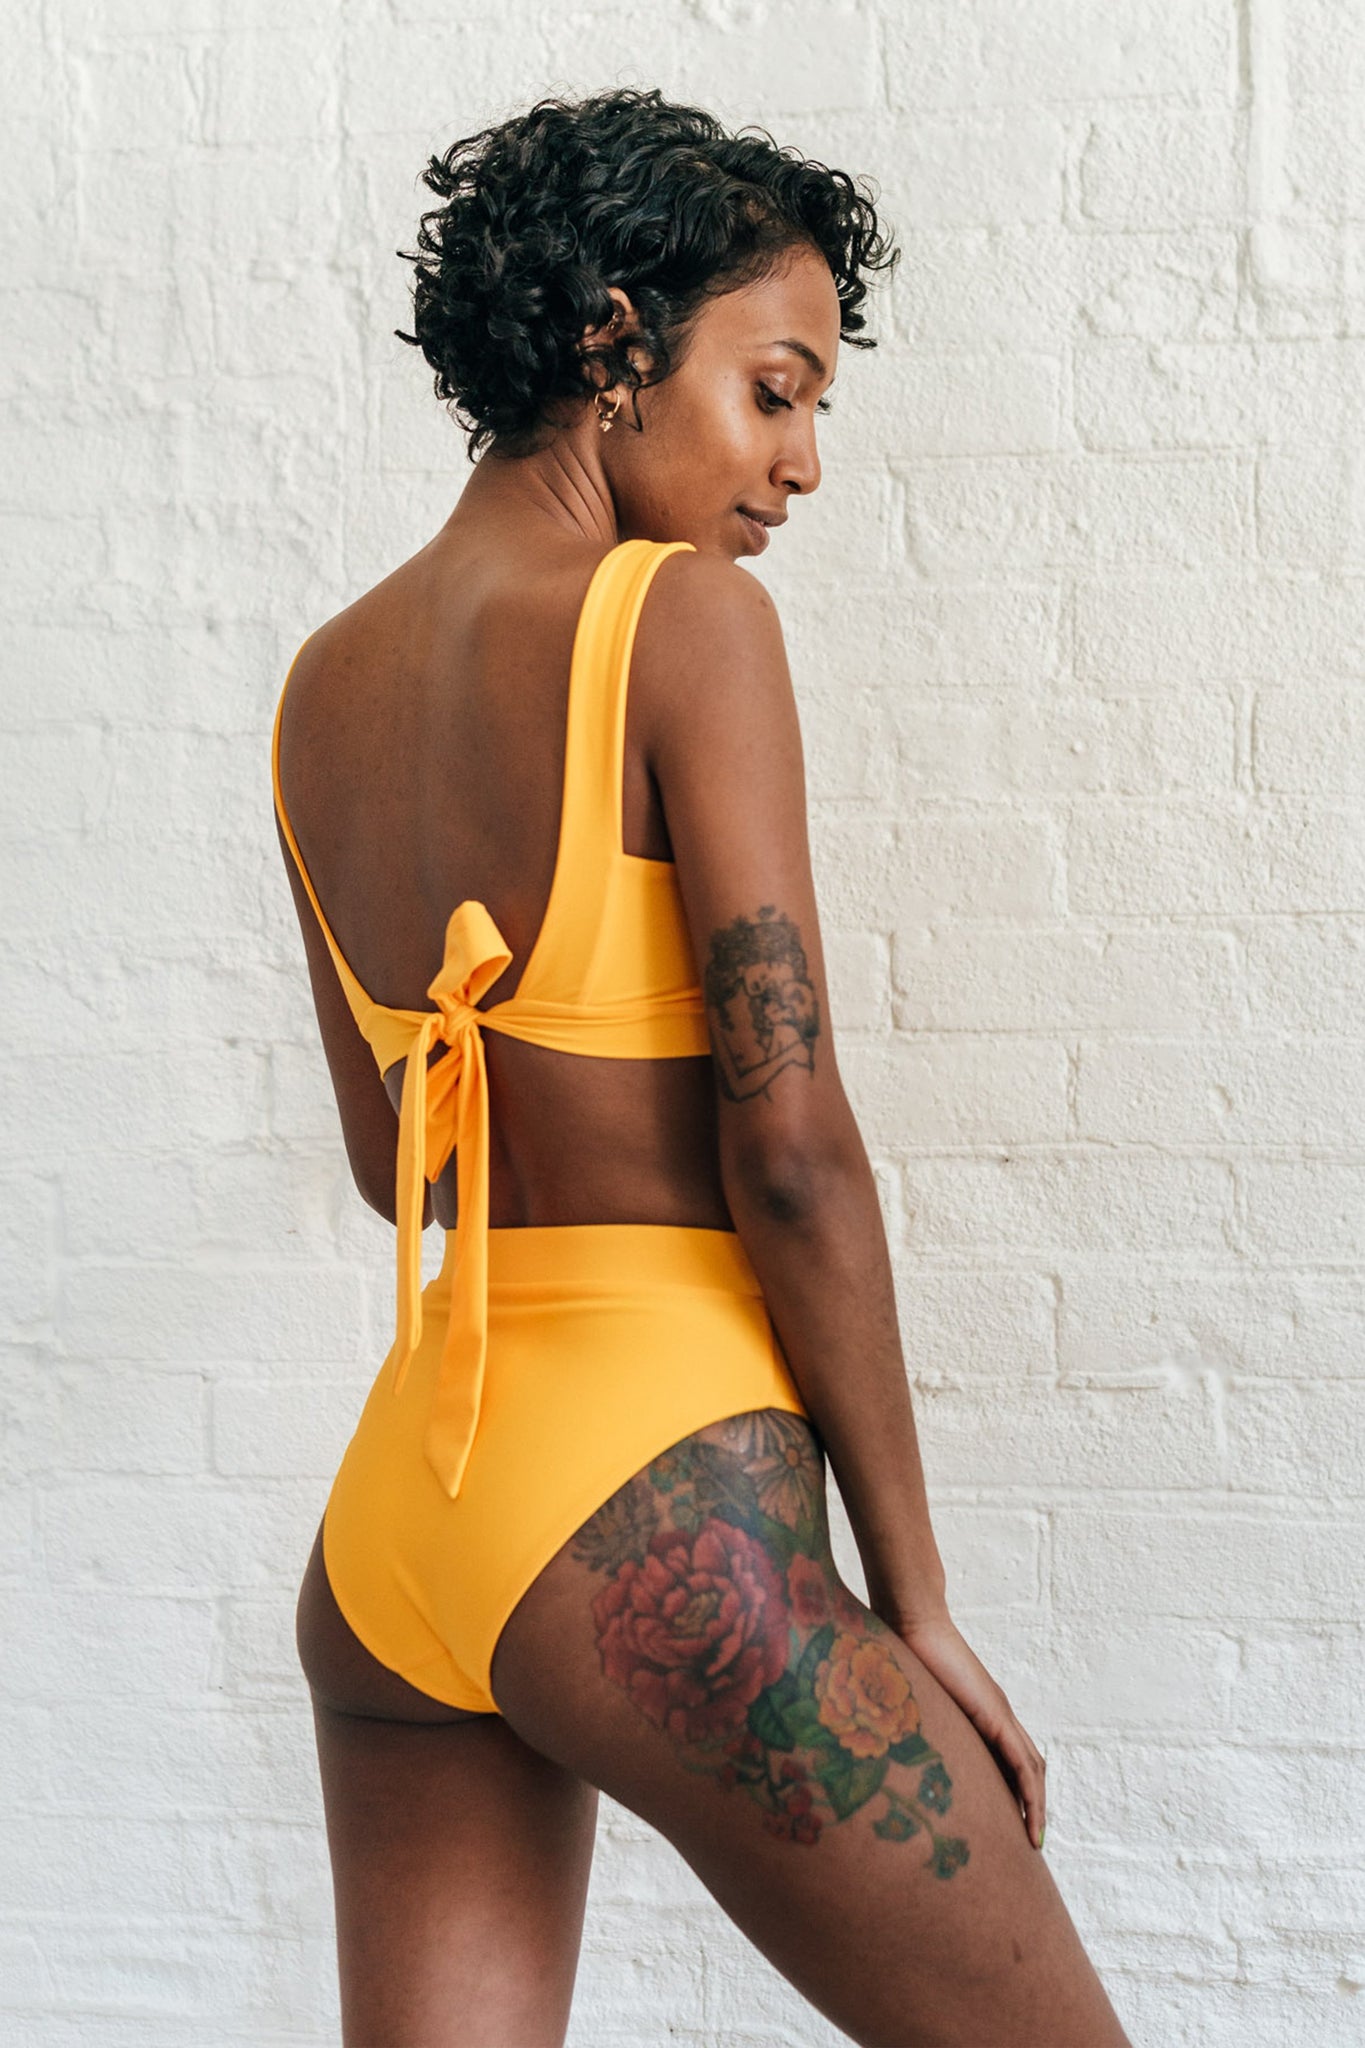 The back of a woman looking down wearing mustard yellow high waisted bikini bottoms and a matching mustard yellow adjustable bikini top.